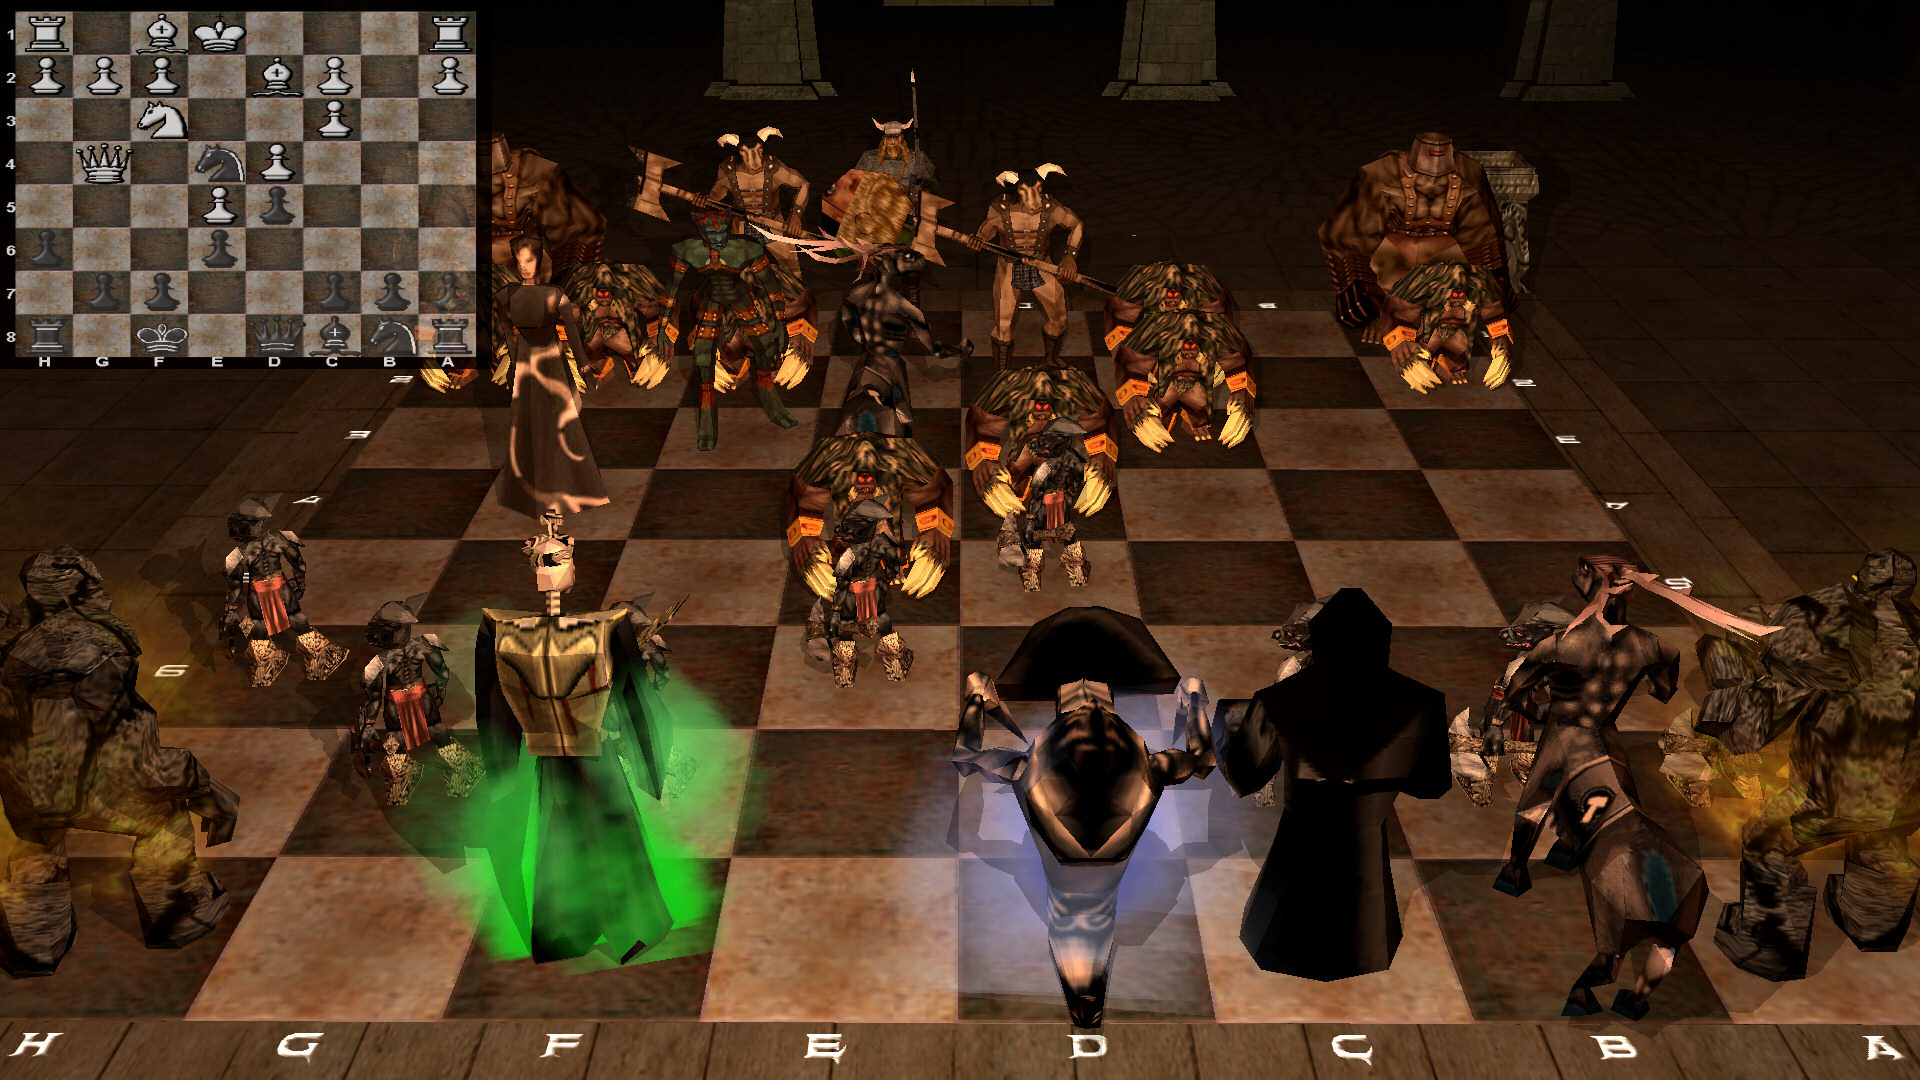 battle chess game of kings battle animations